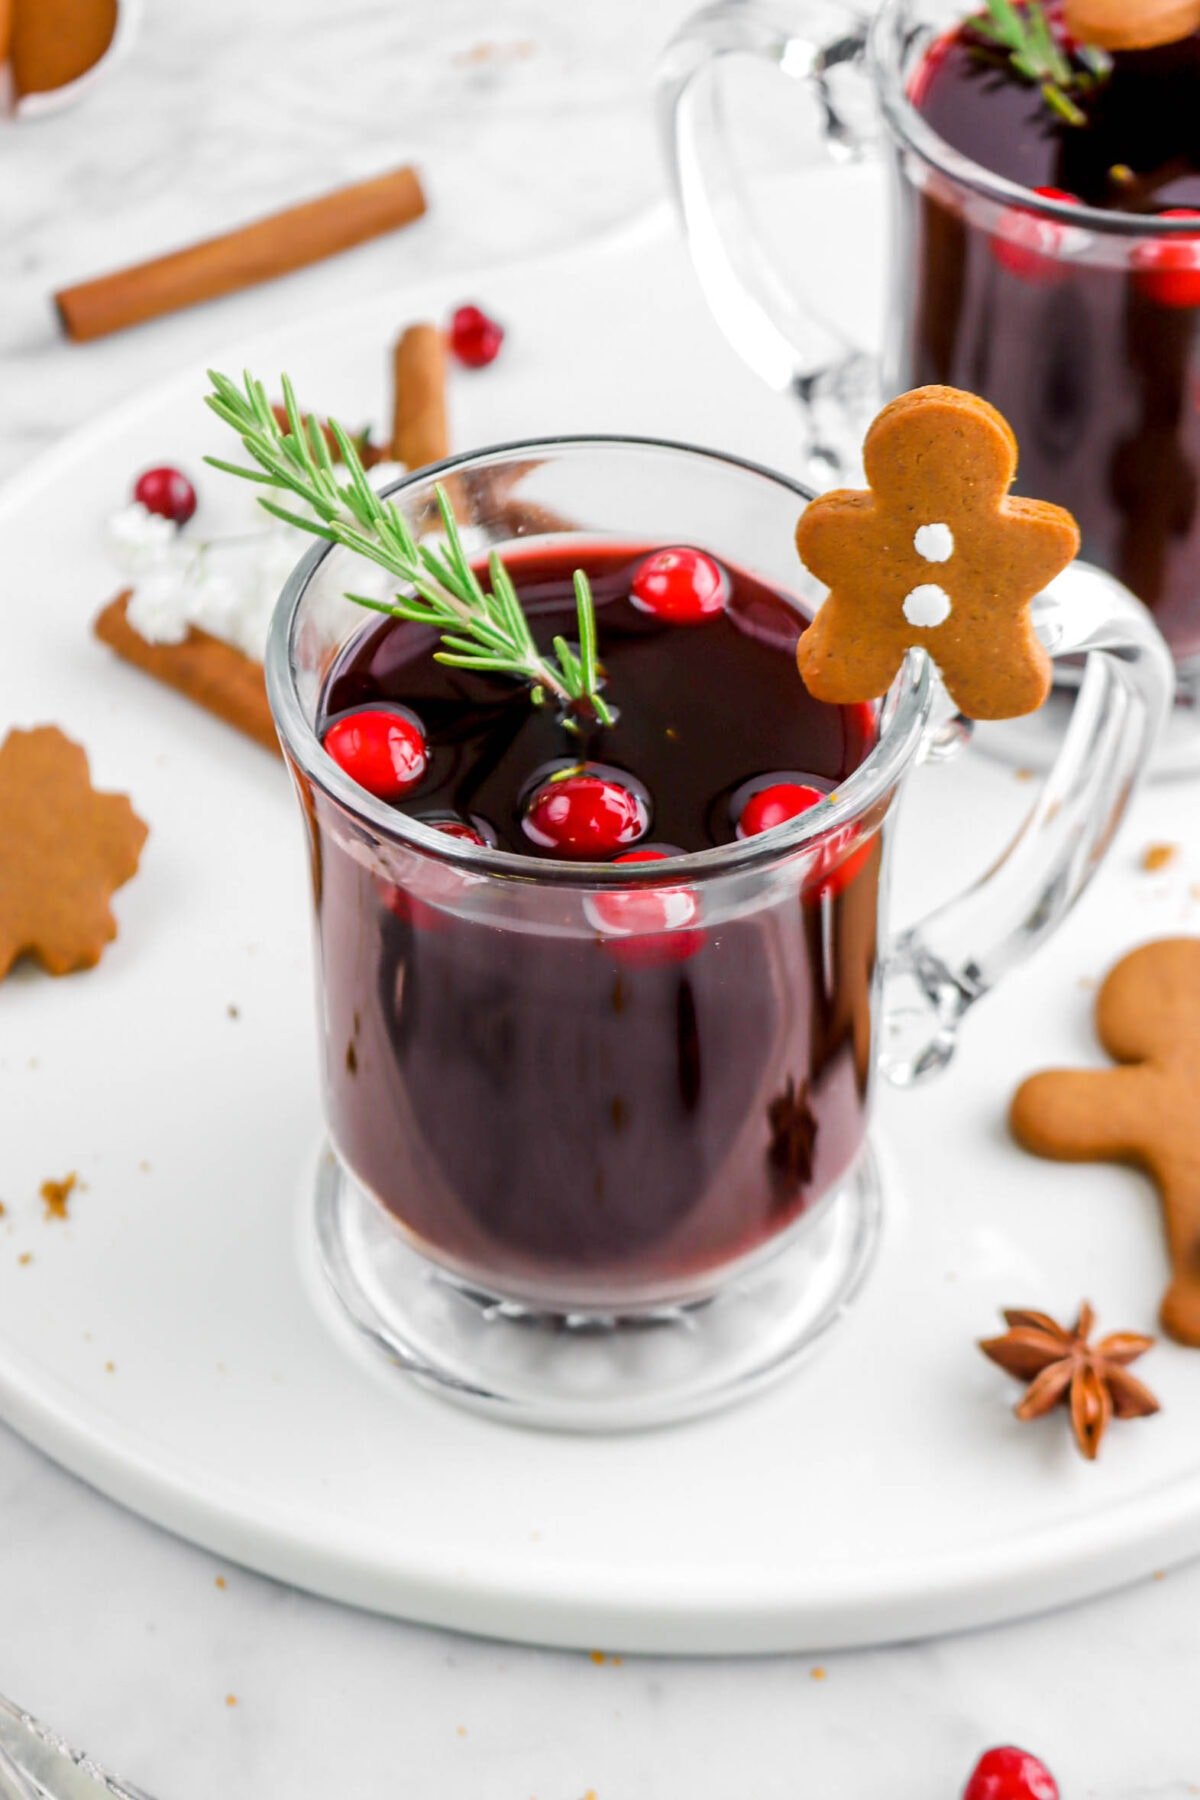 close up of mulled wine in glass mug with sprig of rosemary and six cranberries in the drink, and a gingerbread cookie on the rim